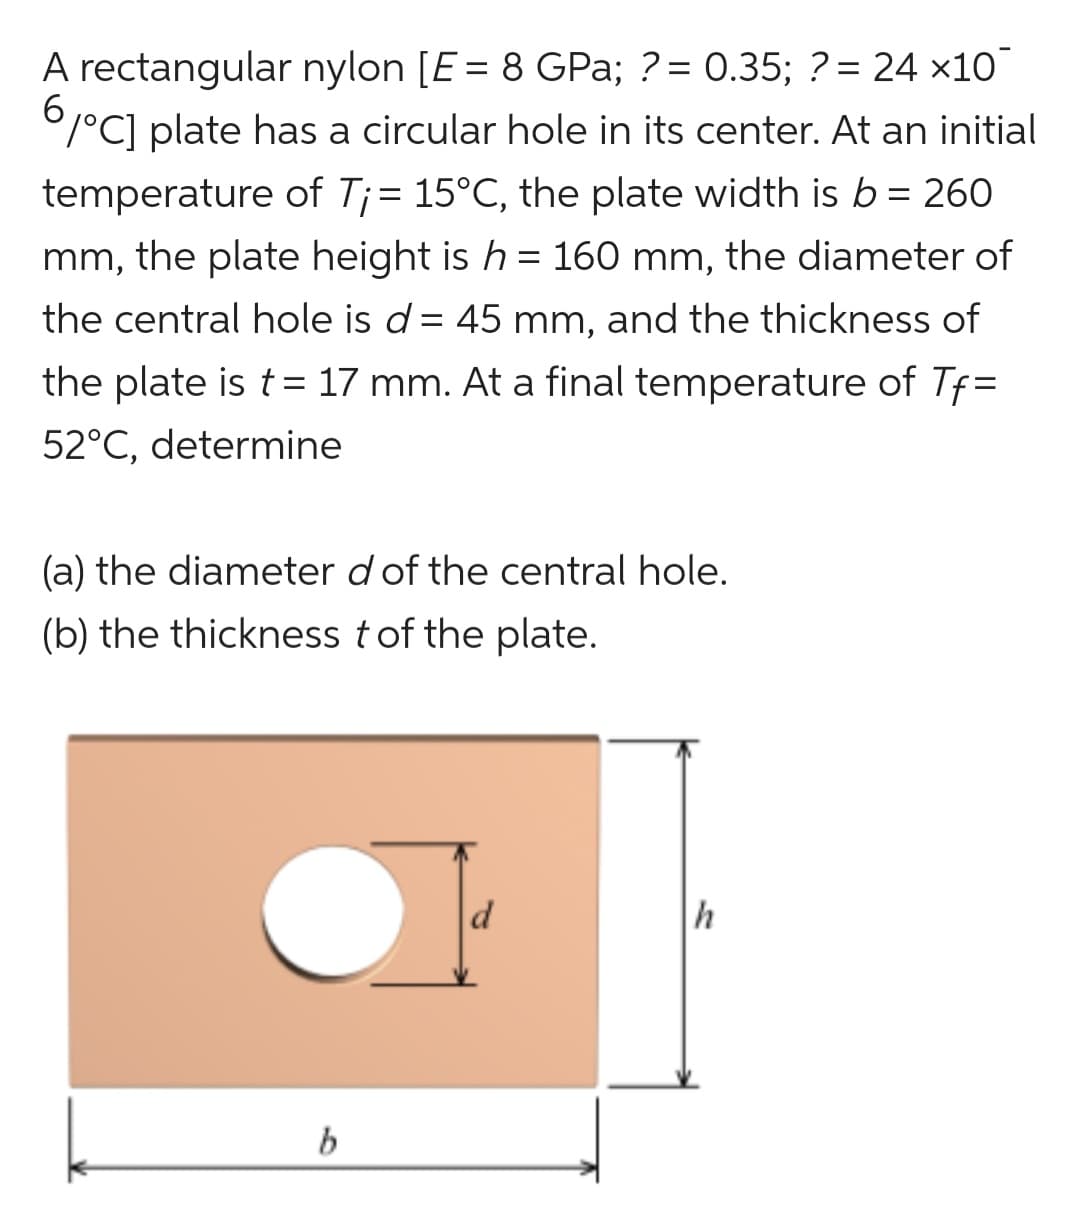 A rectangular nylon [E = 8 GPa; ?= 0.35; ? = 24 ×10
6/°C] plate has a circular hole in its center. At an initial
temperature of T¡ = 15°C, the plate width is b = 260
mm, the plate height is h = 160 mm, the diameter of
the central hole is d = 45 mm, and the thickness of
the plate is t = 17 mm. At a final temperature of Tf=
52°C, determine
(a) the diameter d of the central hole.
(b) the thickness t of the plate.
b
h